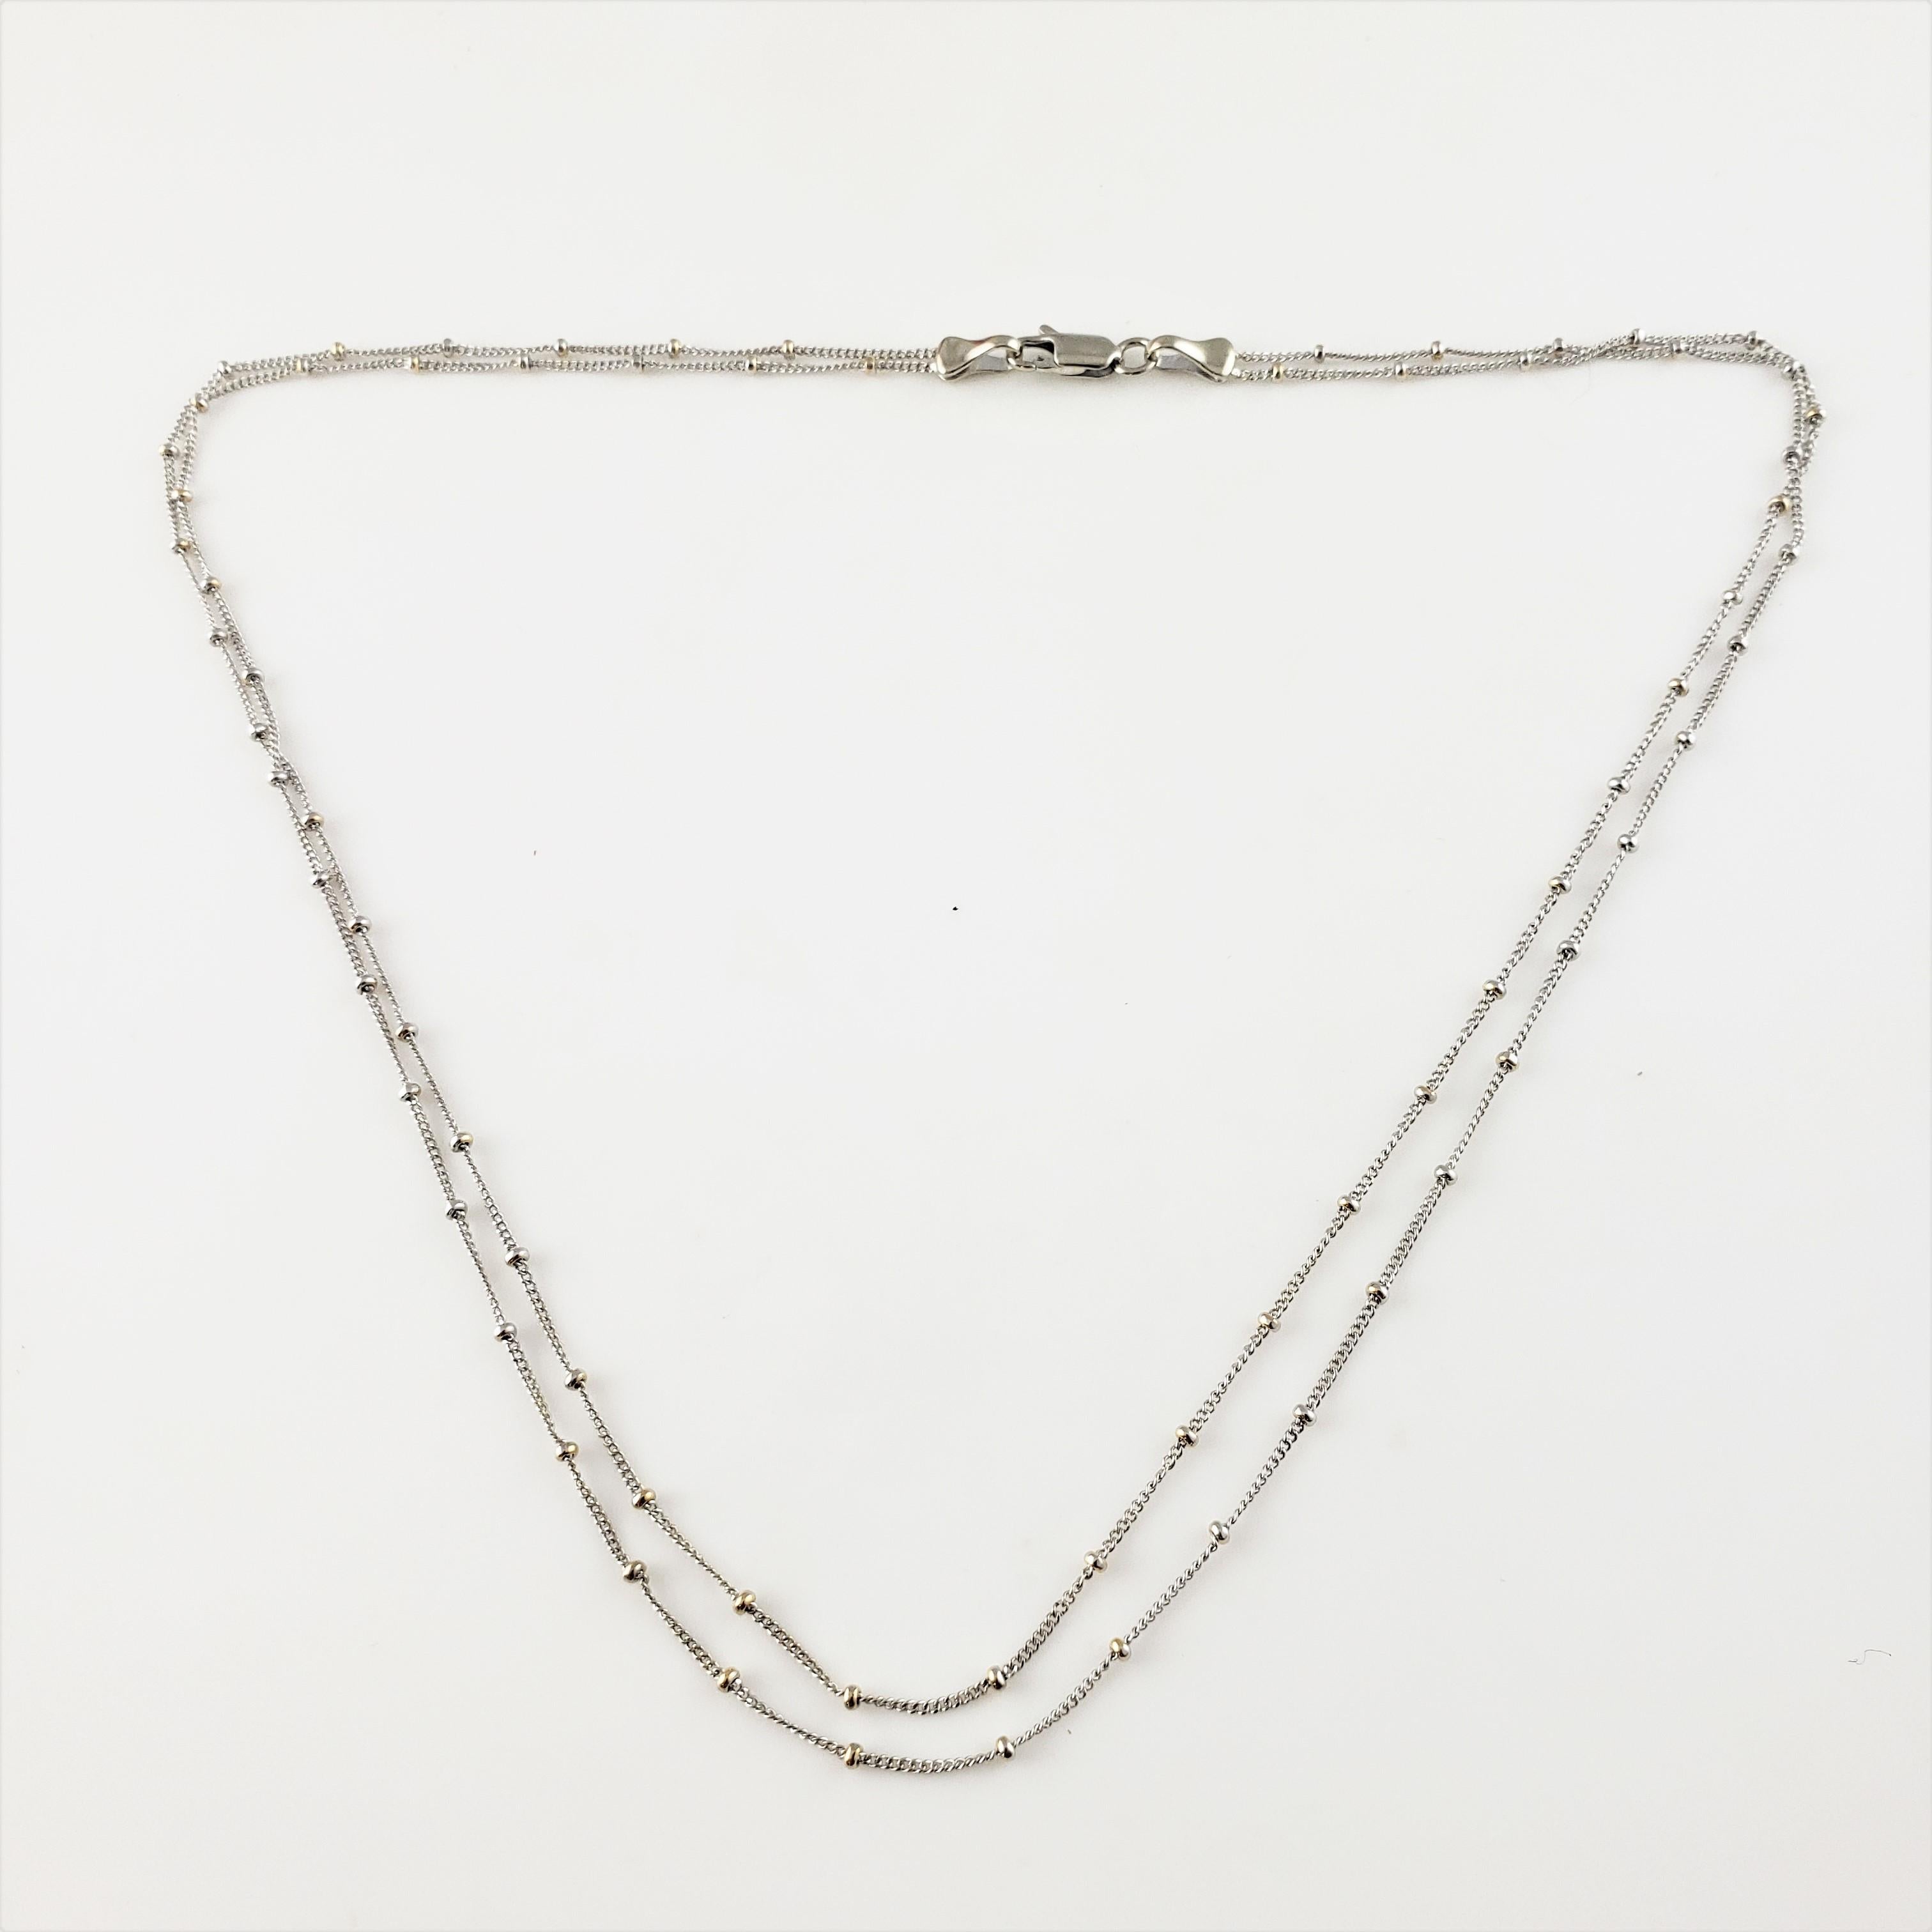 Vintage 14 Karat White Gold Double Strand Necklace-

This elegant double strand beaded chain necklace is crafted in beautifully detailed 14K white gold.

Size: 16 inches

Weight: 2.7 dwt. / 4.3 gr.

Stamped: 585